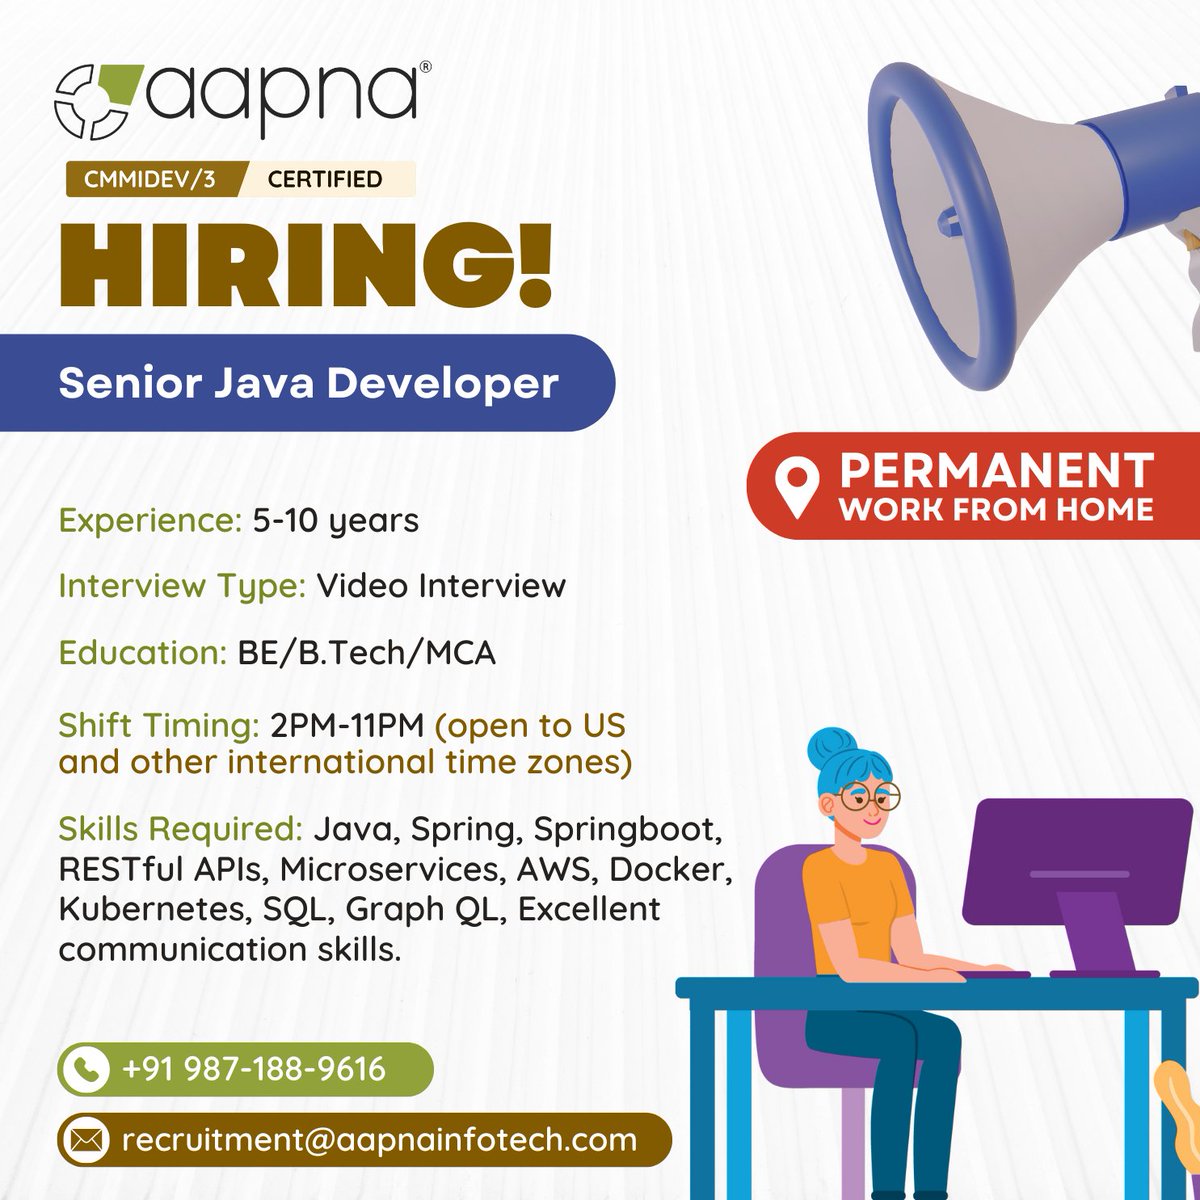 👩‍💻 Calling all Seasoned Senior Java Developers!

🌟 Experience: 5-10 Years

🎓 Education: BE/B.Tech/MCA

📧 Submit your profile to: recruitment@aapnainfotech.com

📝 Application form: aapnainfotech.com/resume-applica…

#JavaDeveloper #JavaFullstack #Spring #Springboot #PermanentWFH #Jobs